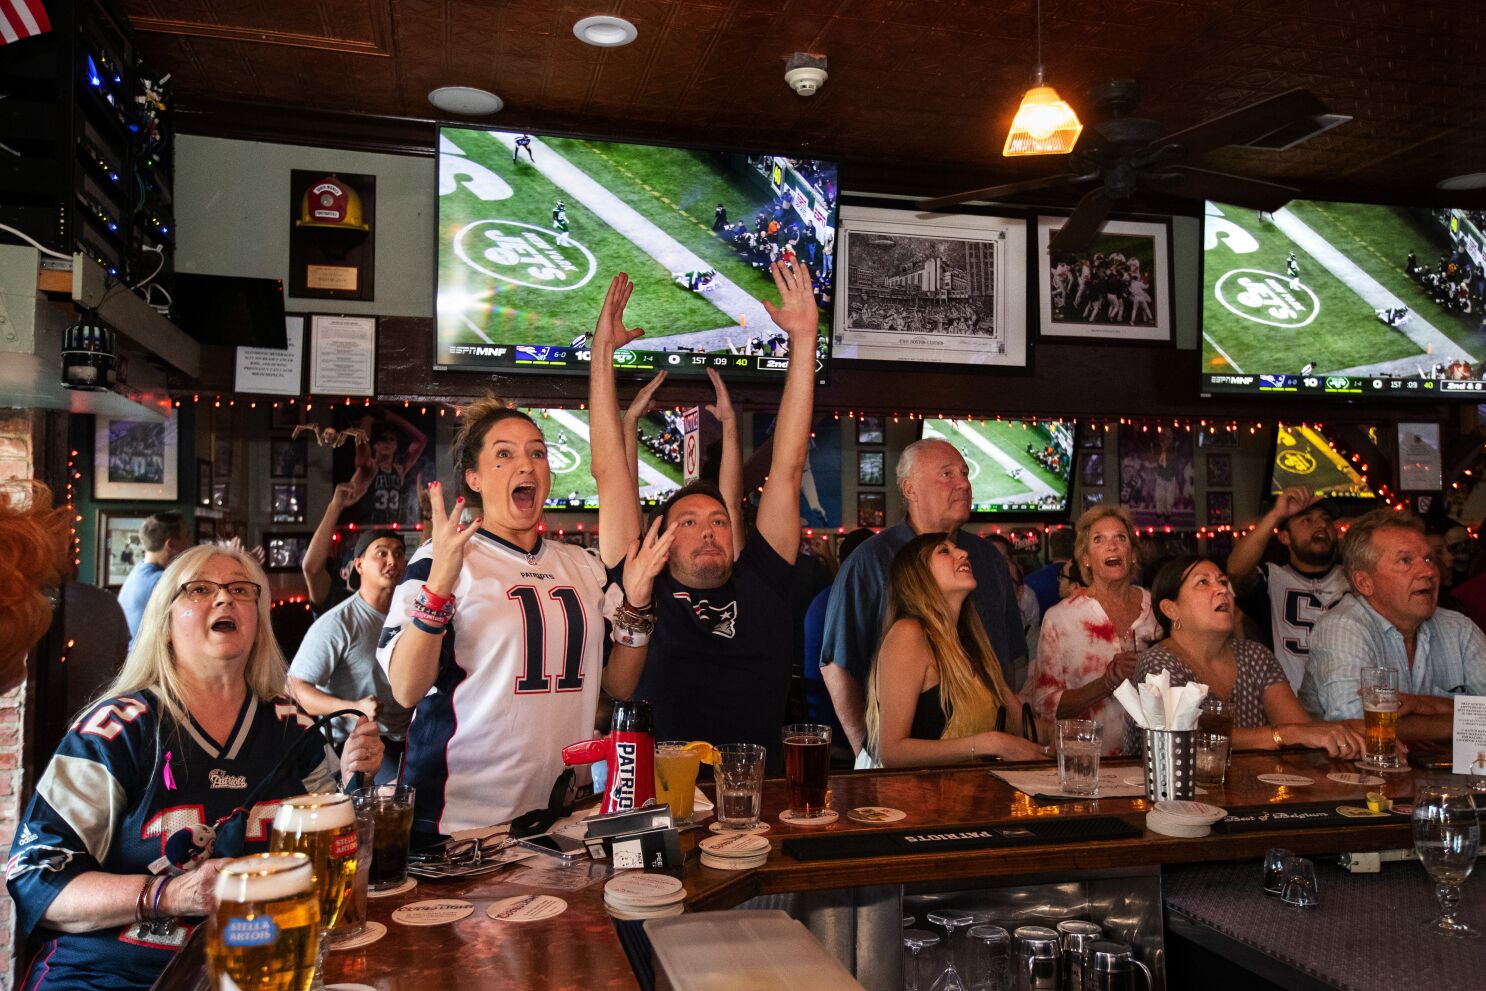  sports bar owners are excited to welcome back fans - Los Angeles  Times